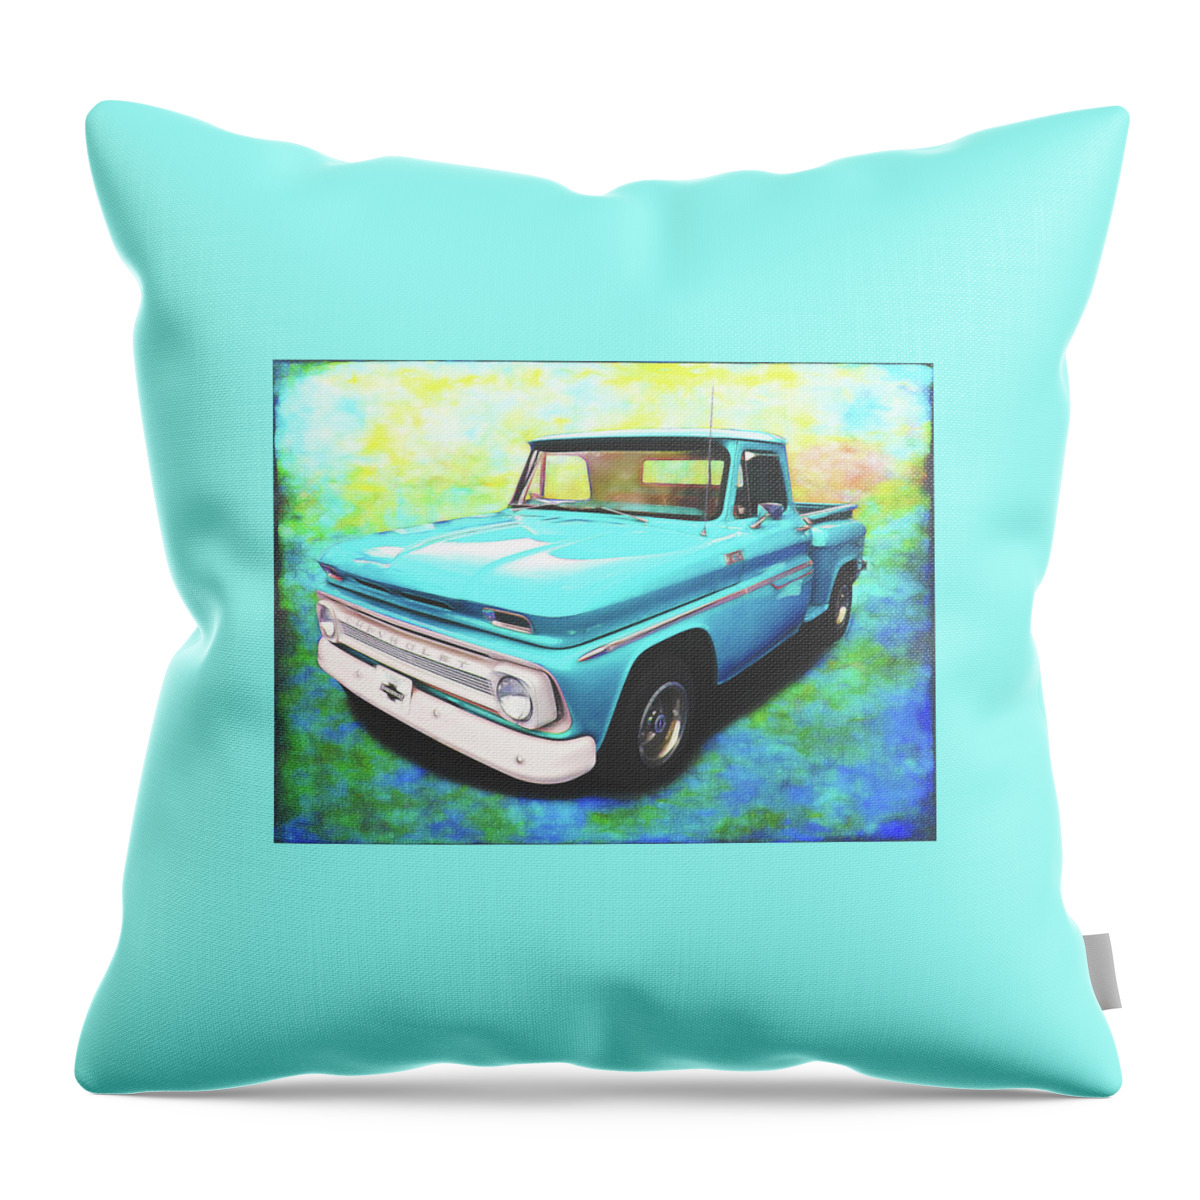 1965 Chevy Truck Throw Pillow featuring the digital art 1965 Chevy Truck by Rick Wicker